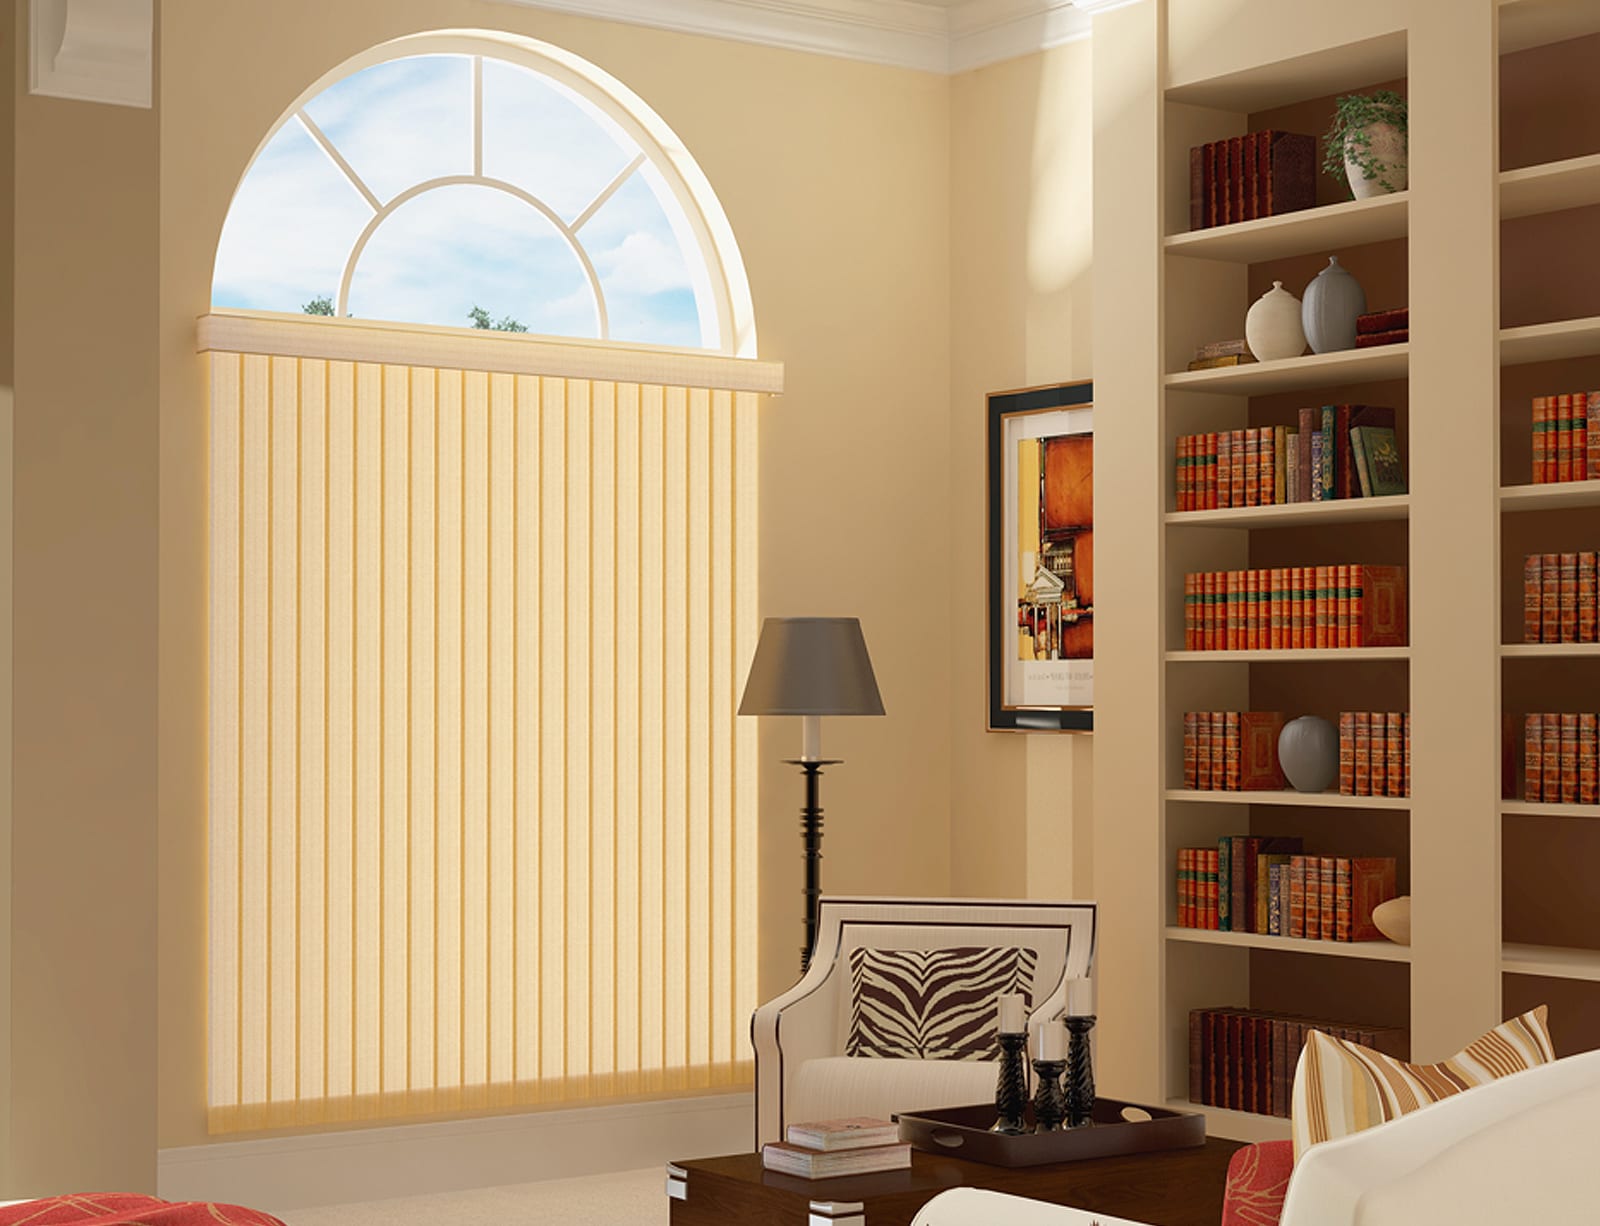 Vertical blinds on arched window.